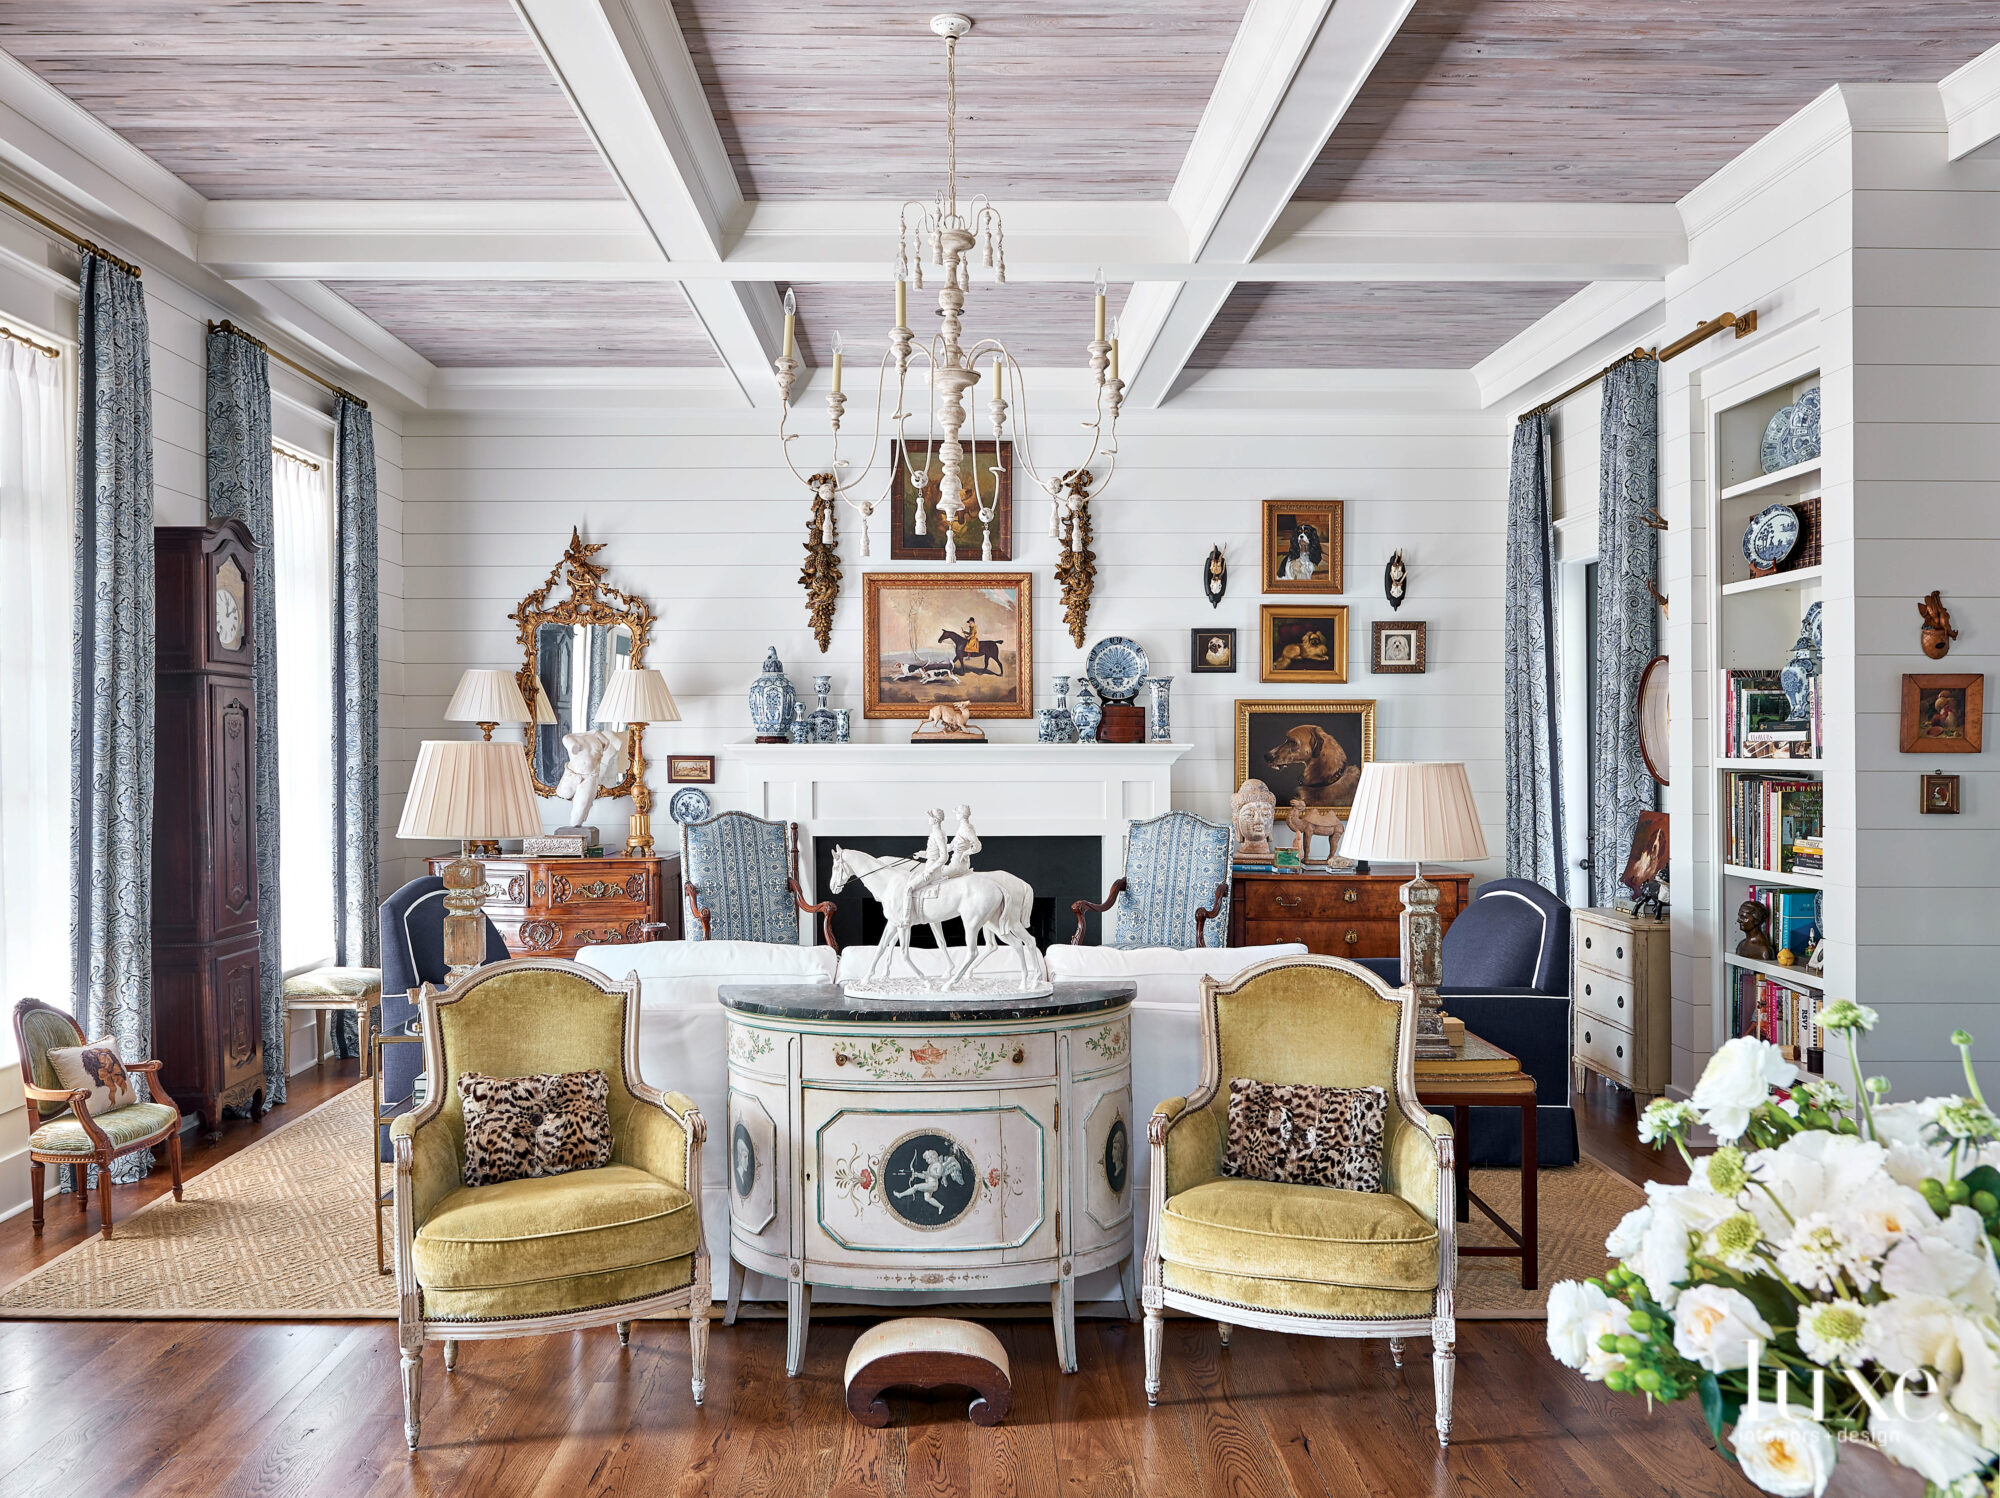 Living room with white walls, coffered ceilings, French armchairs, framed oil paintings and antiques